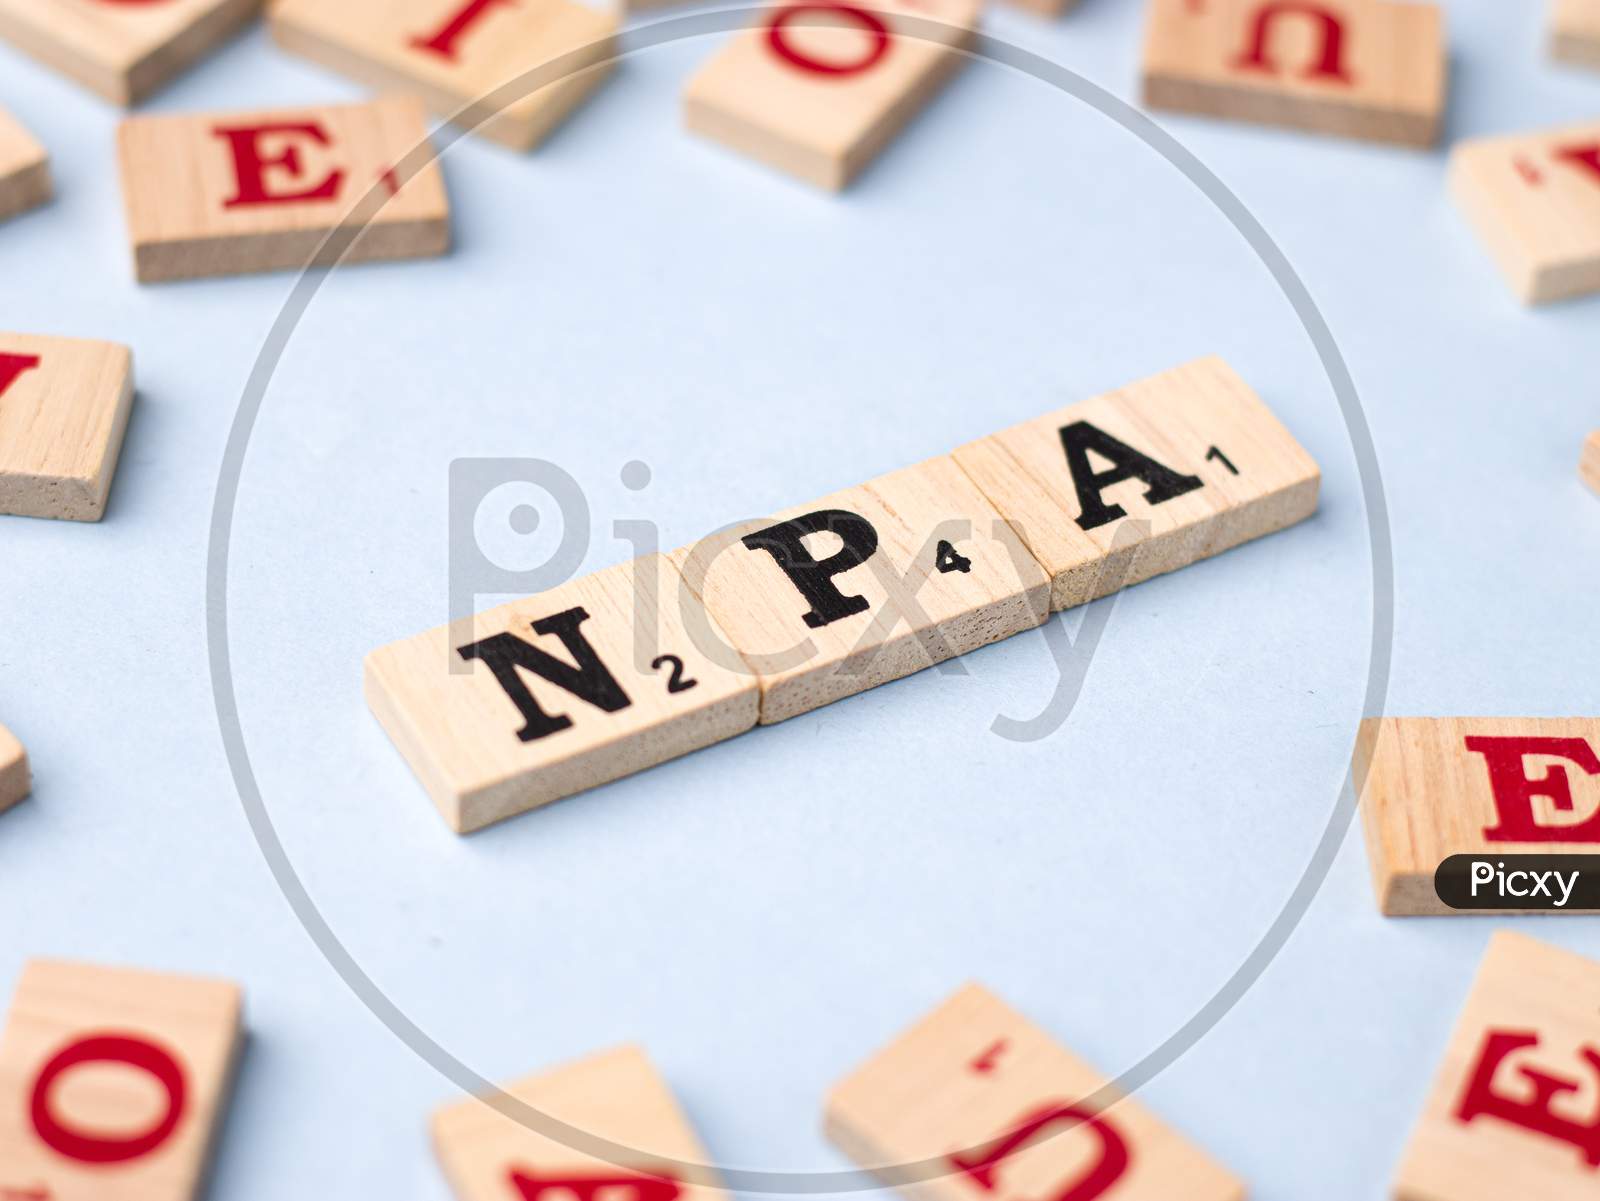 Assam, india - March 30, 2021 : Word NPA written on wooden cubes stock image.